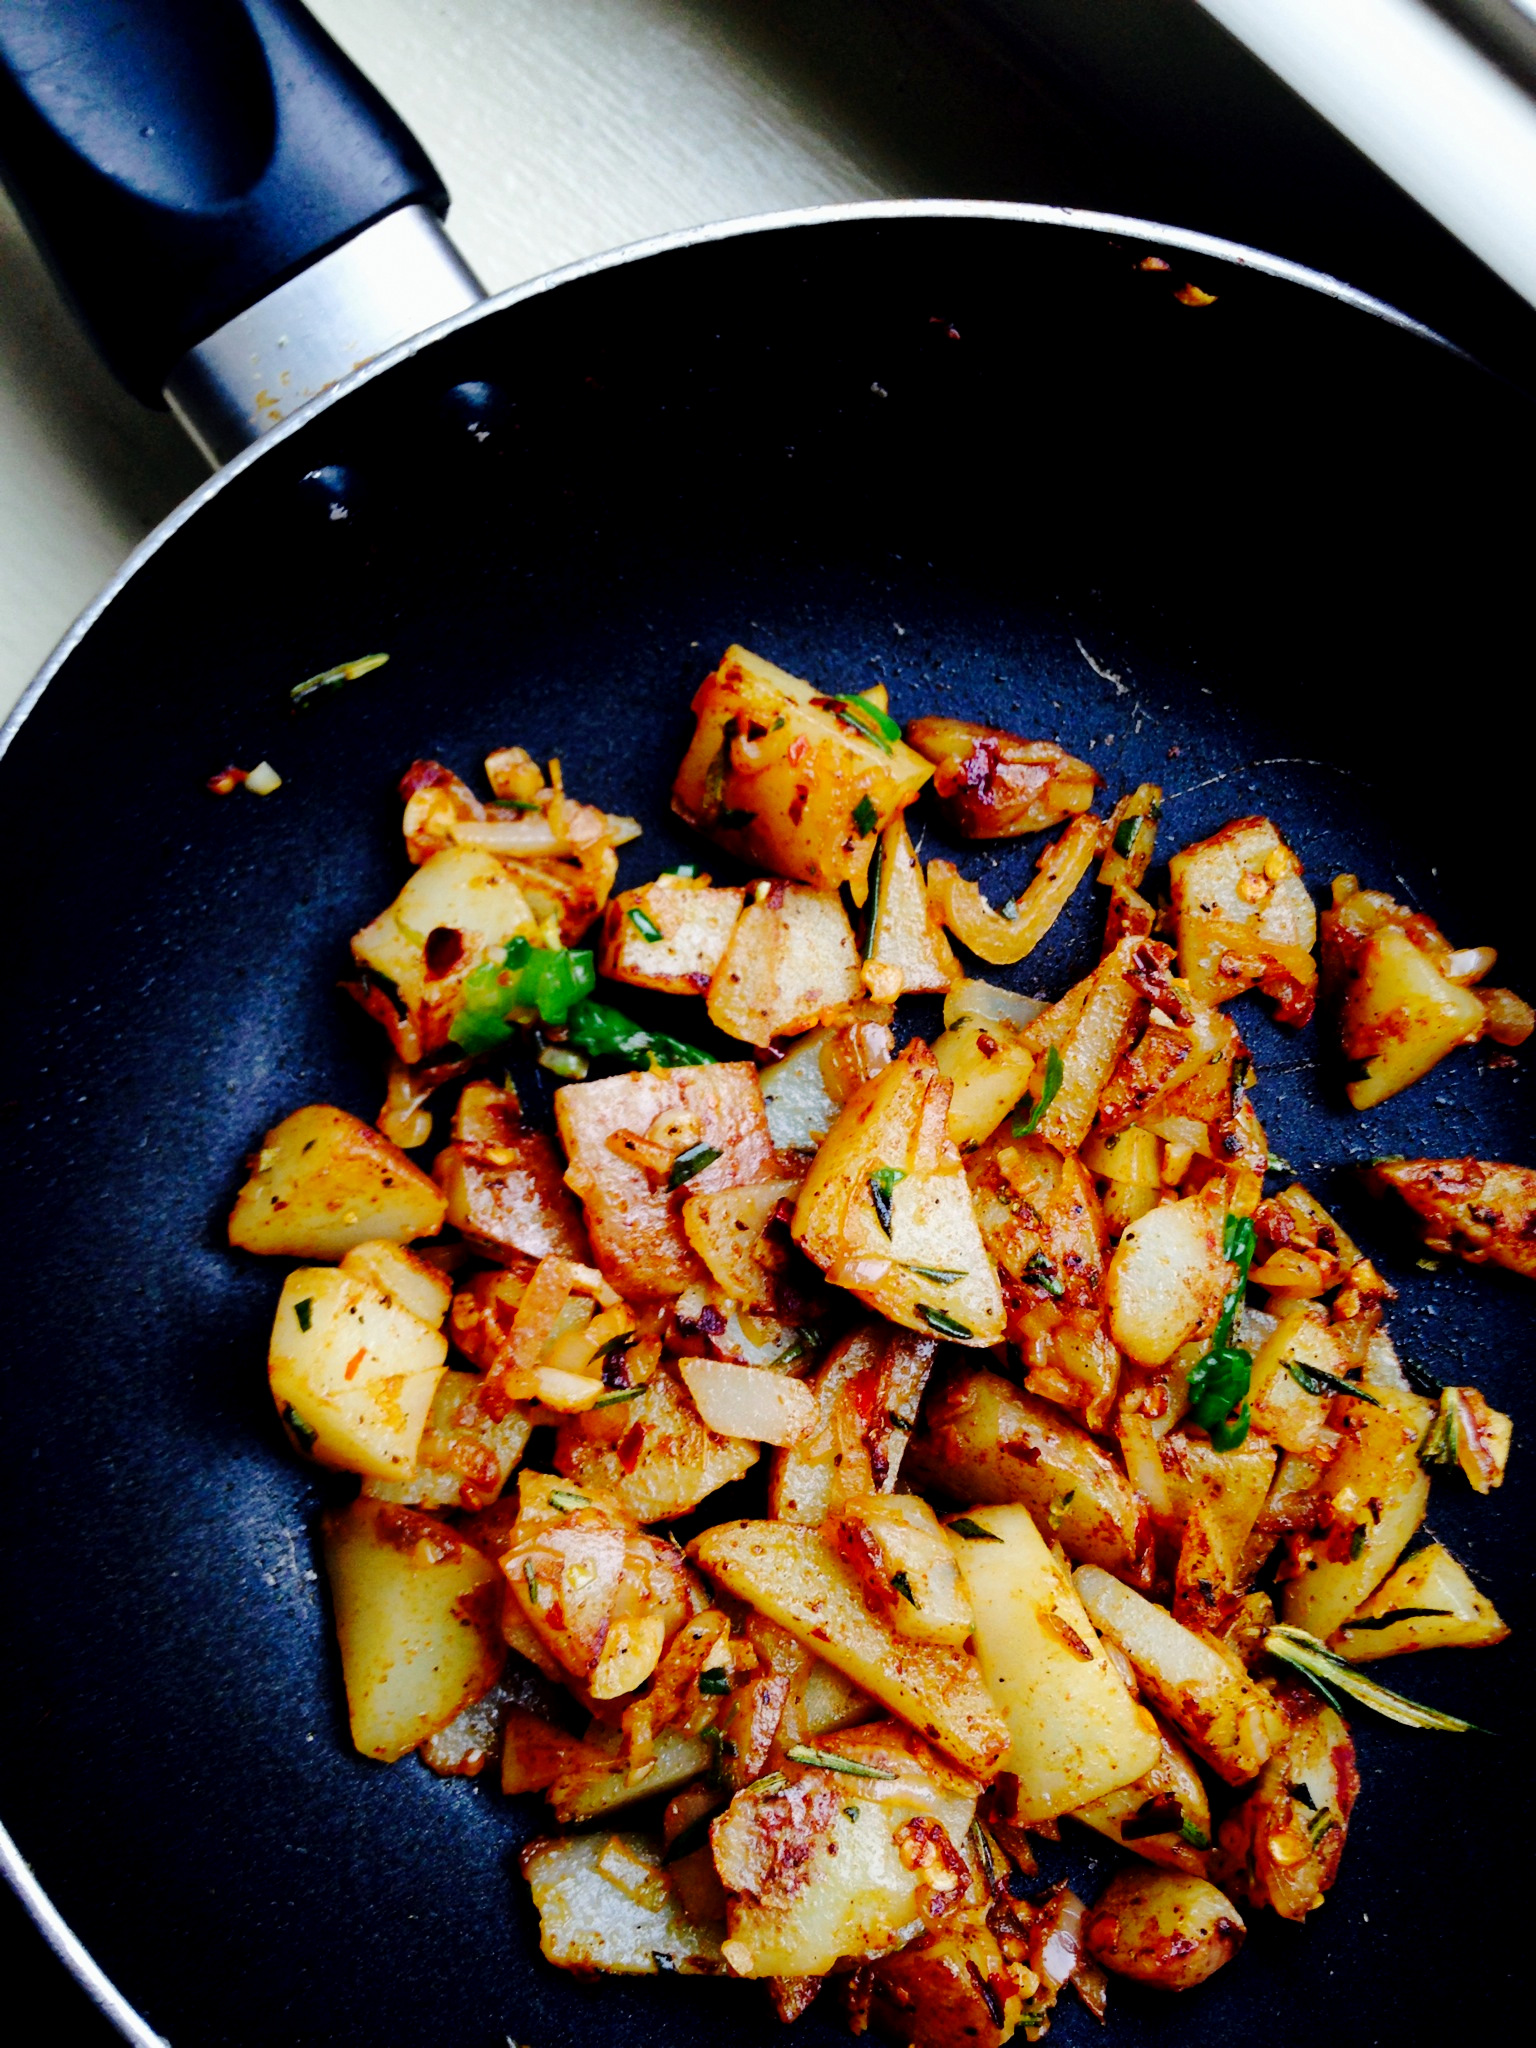 Garlicy Herb Breakfast Potatoes with Caramelized Shallots